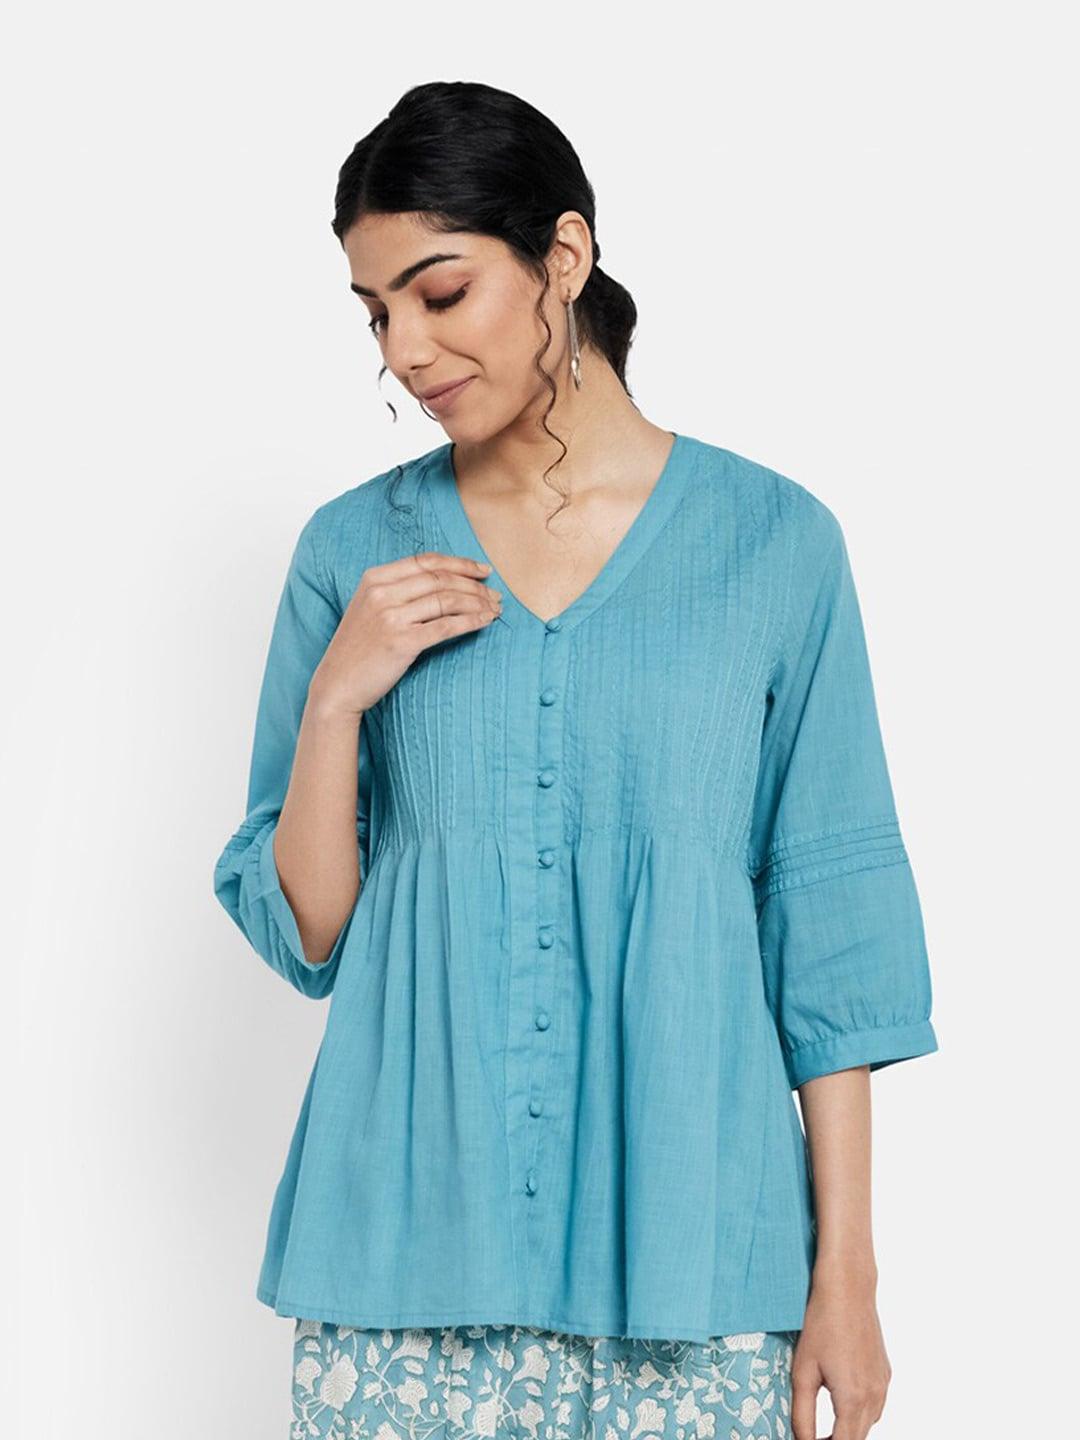 fabindia-blue-solid-cotton-a-line-top